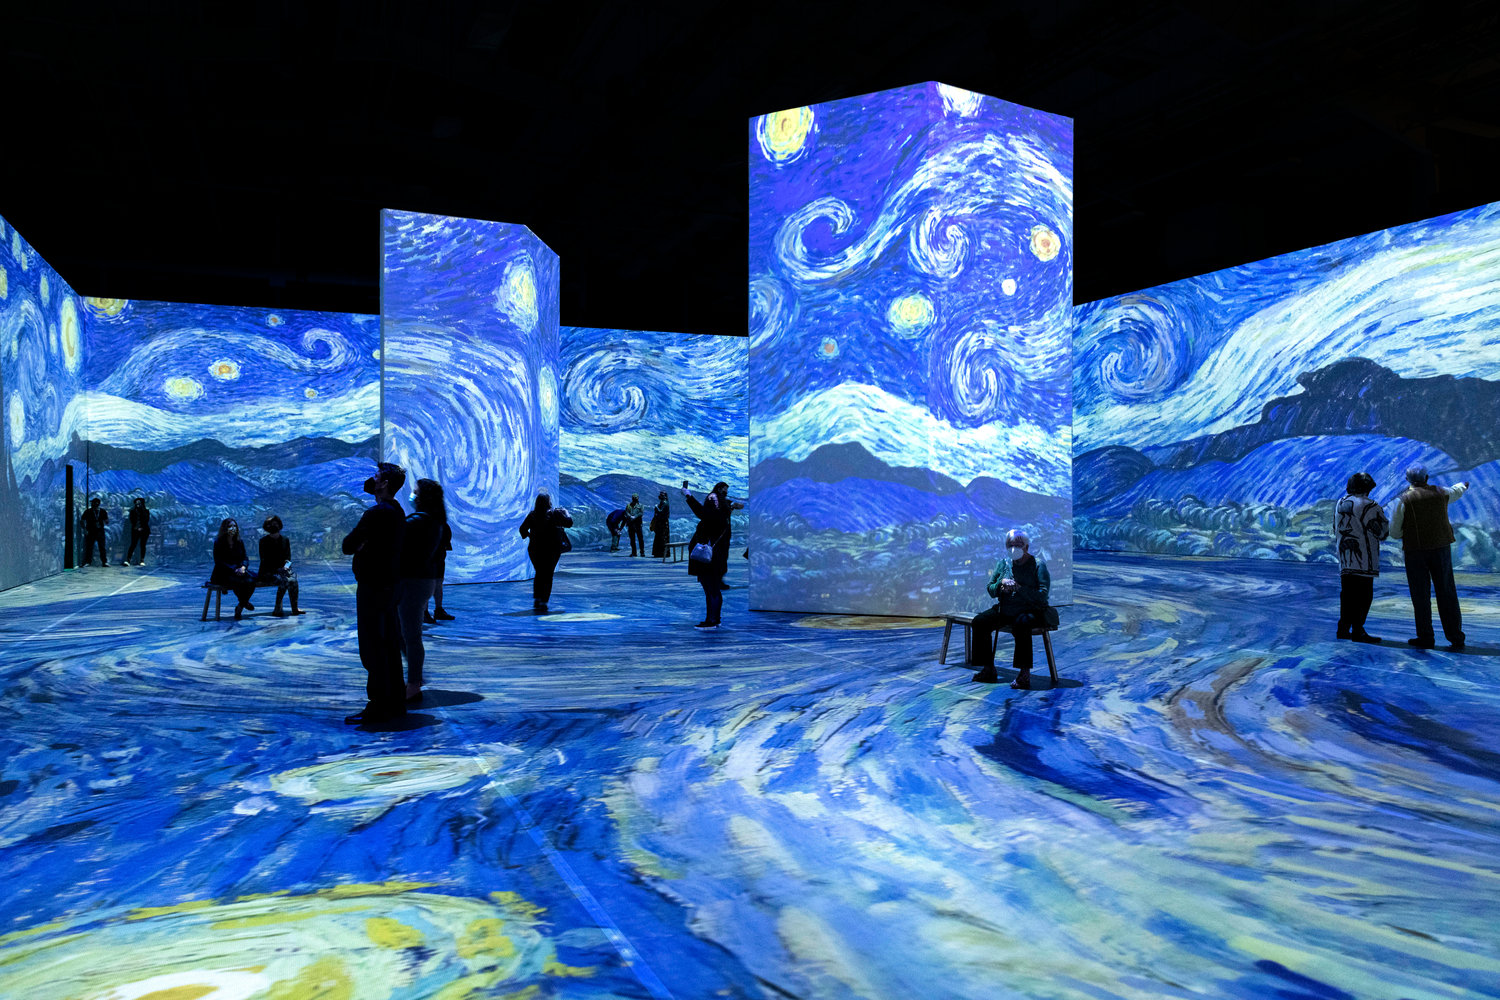 Never before have Van Gogh fans been able to immerse themselves into the Starry Night as they can at this new exhibit.